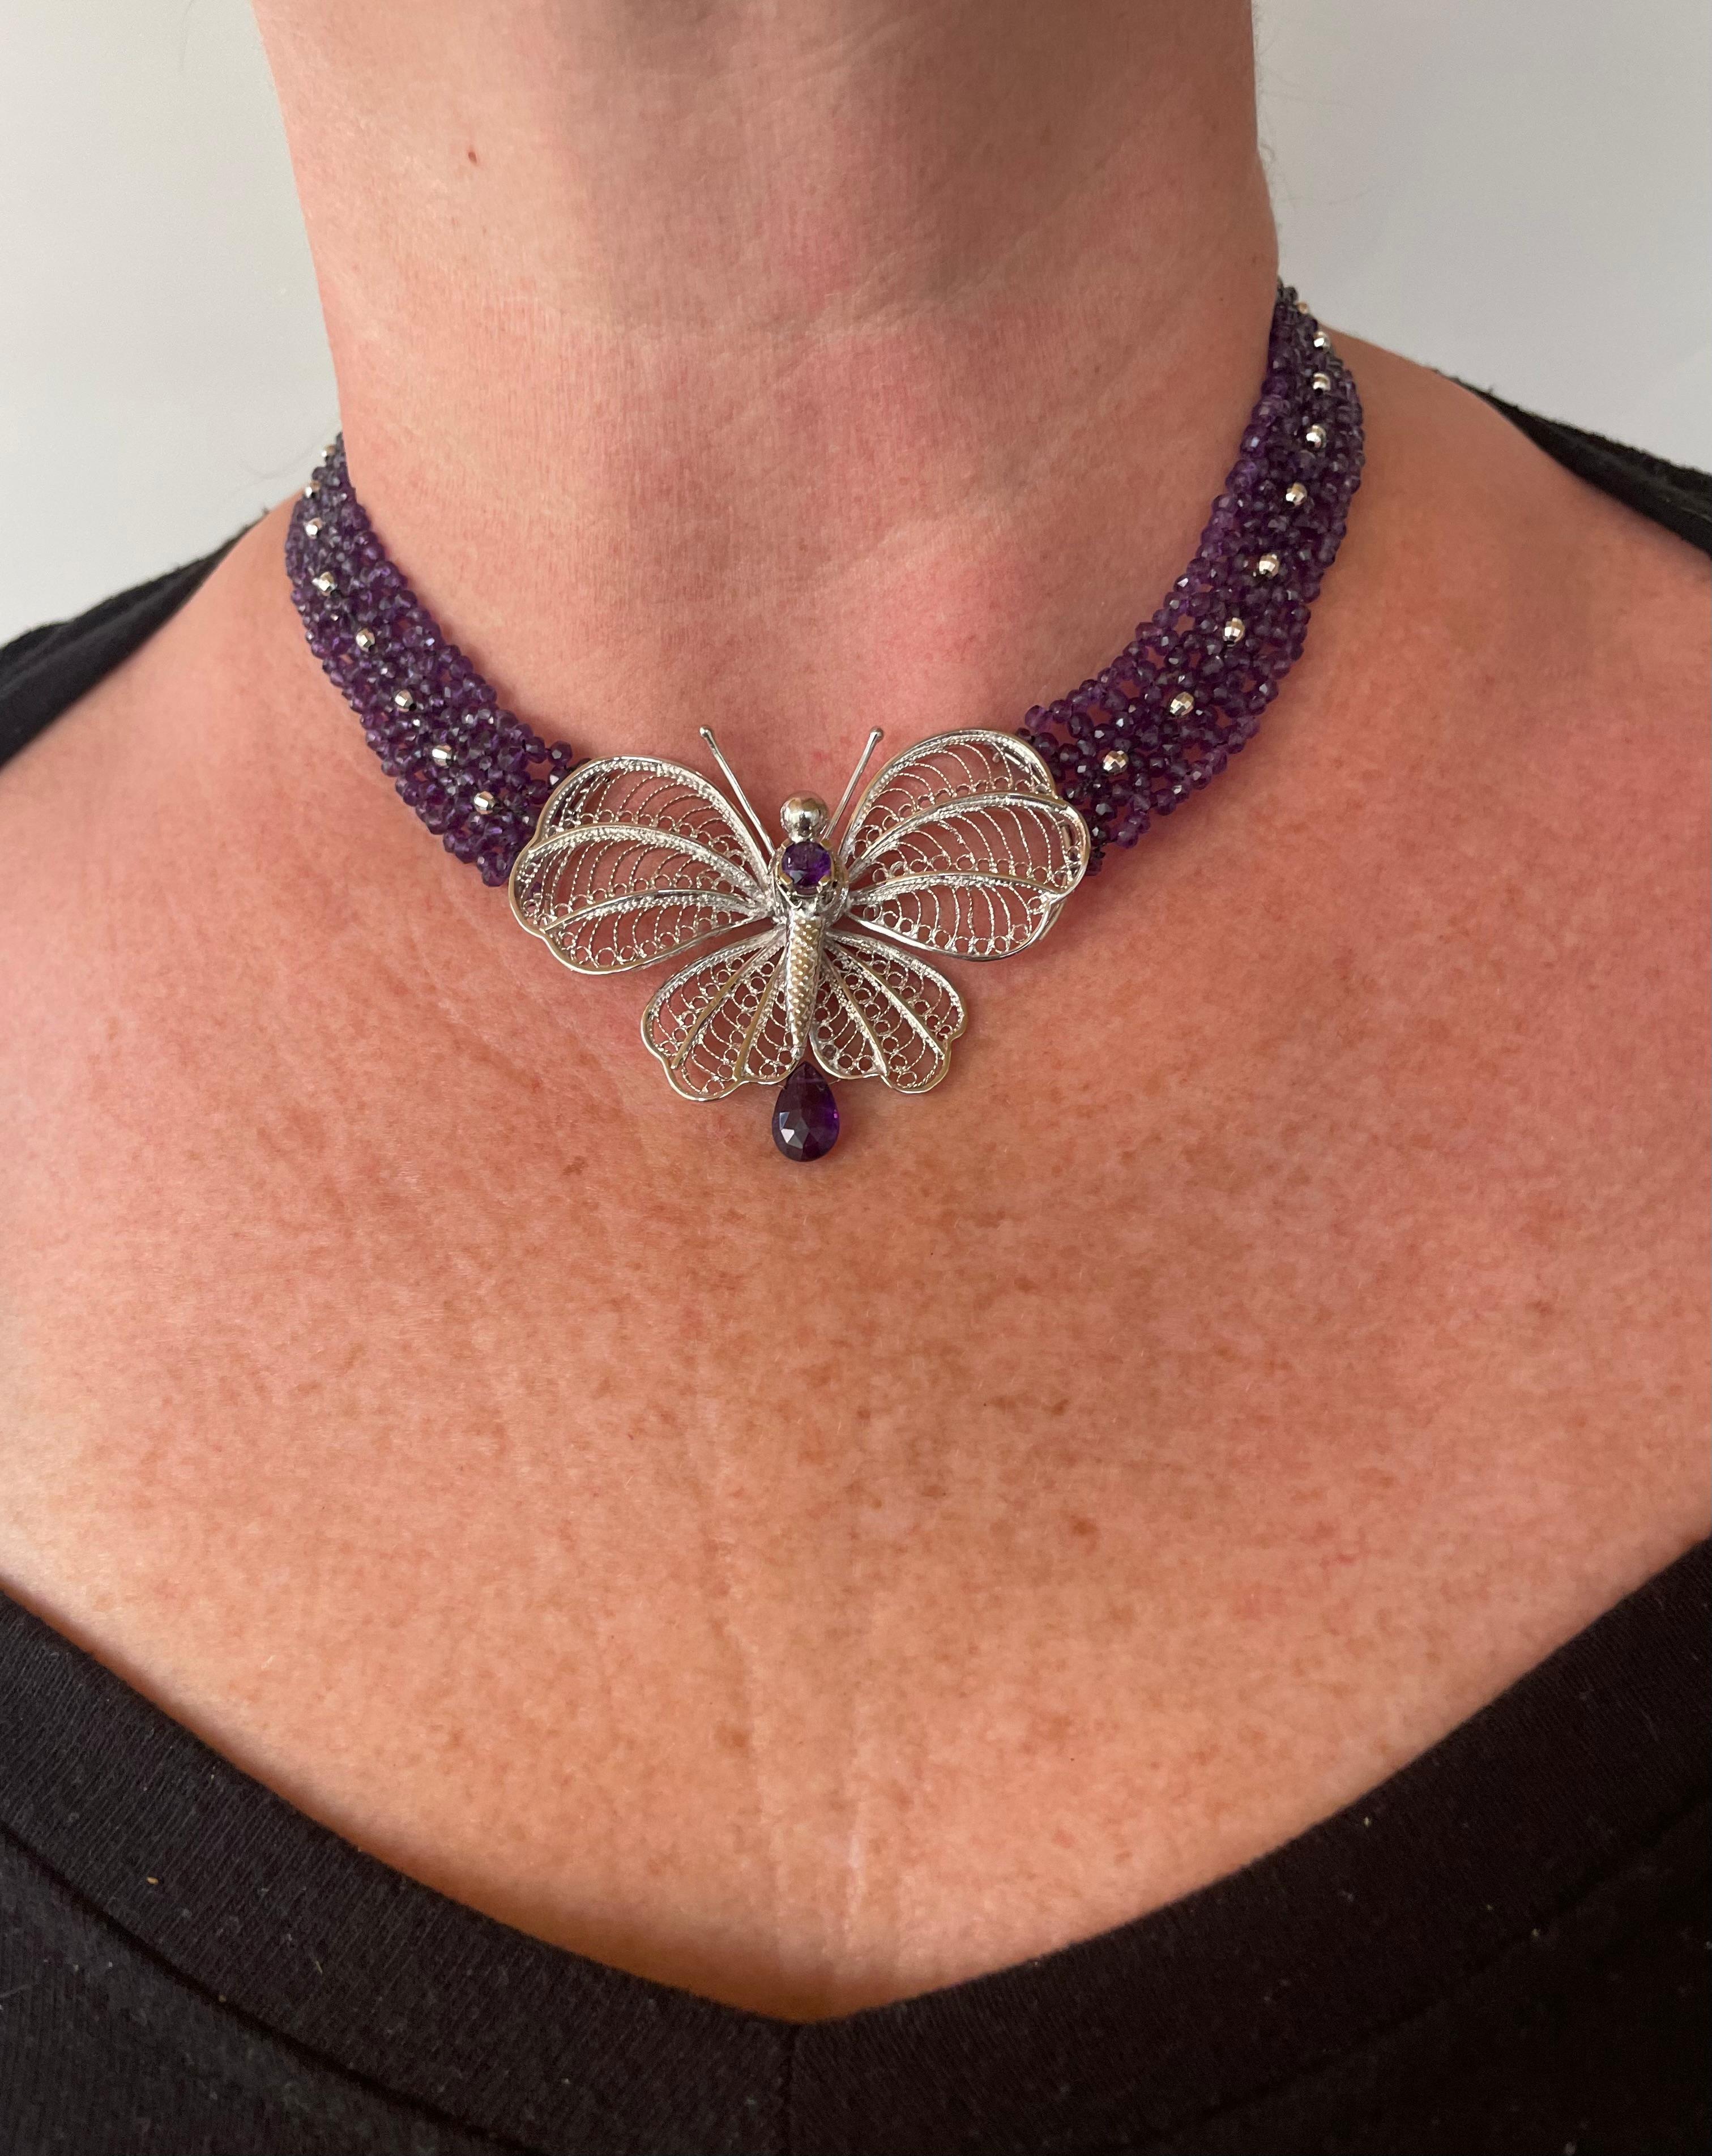 Woven Amethyst Necklace with Silver Butterfly Centerpiece For Sale 1